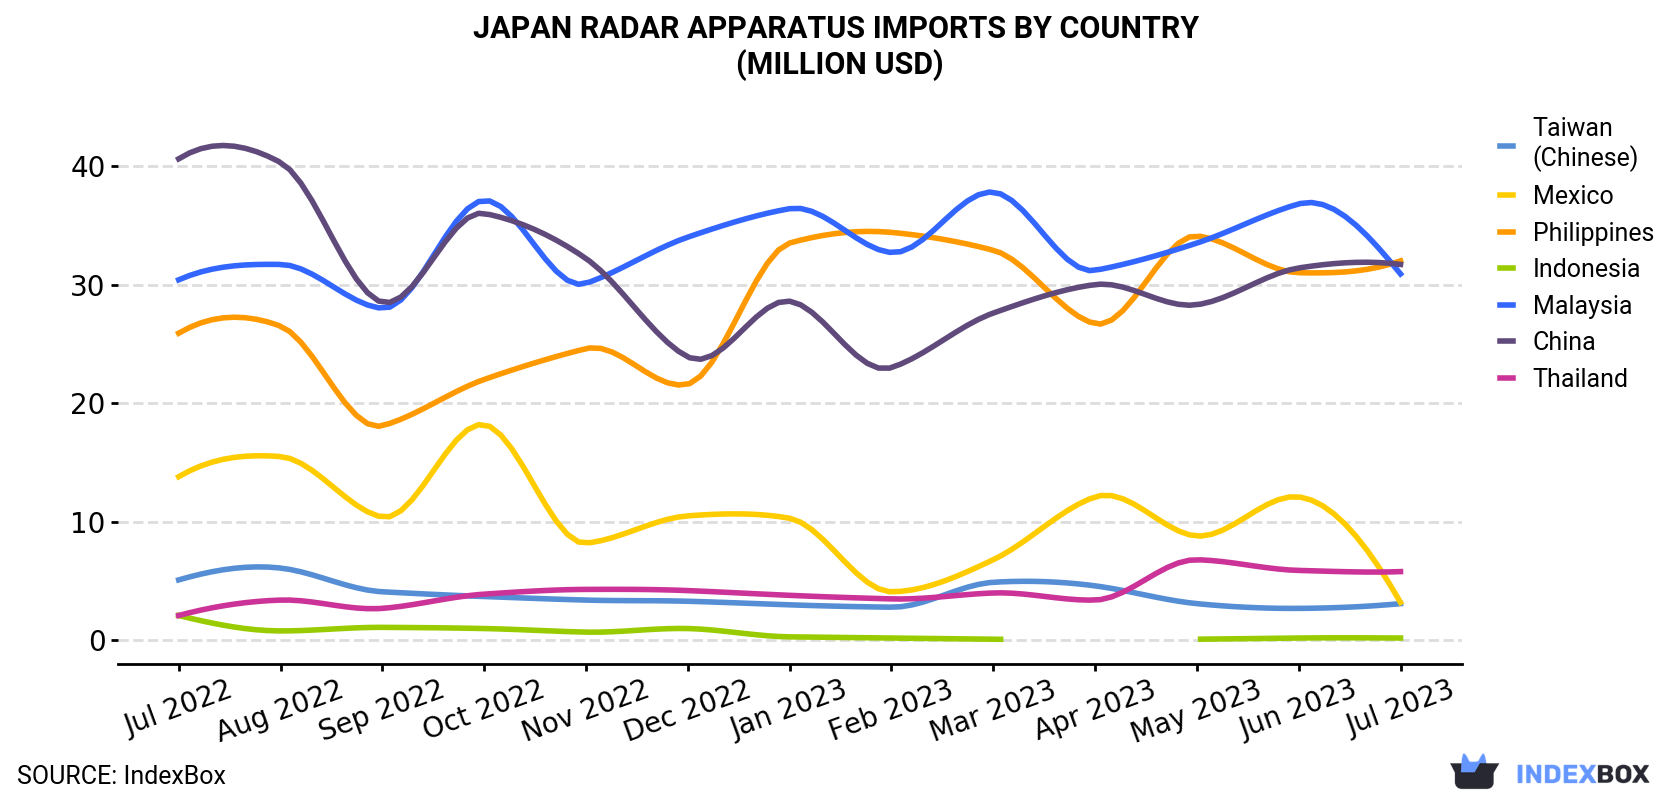 Japan Radar Apparatus Imports By Country (Million USD)